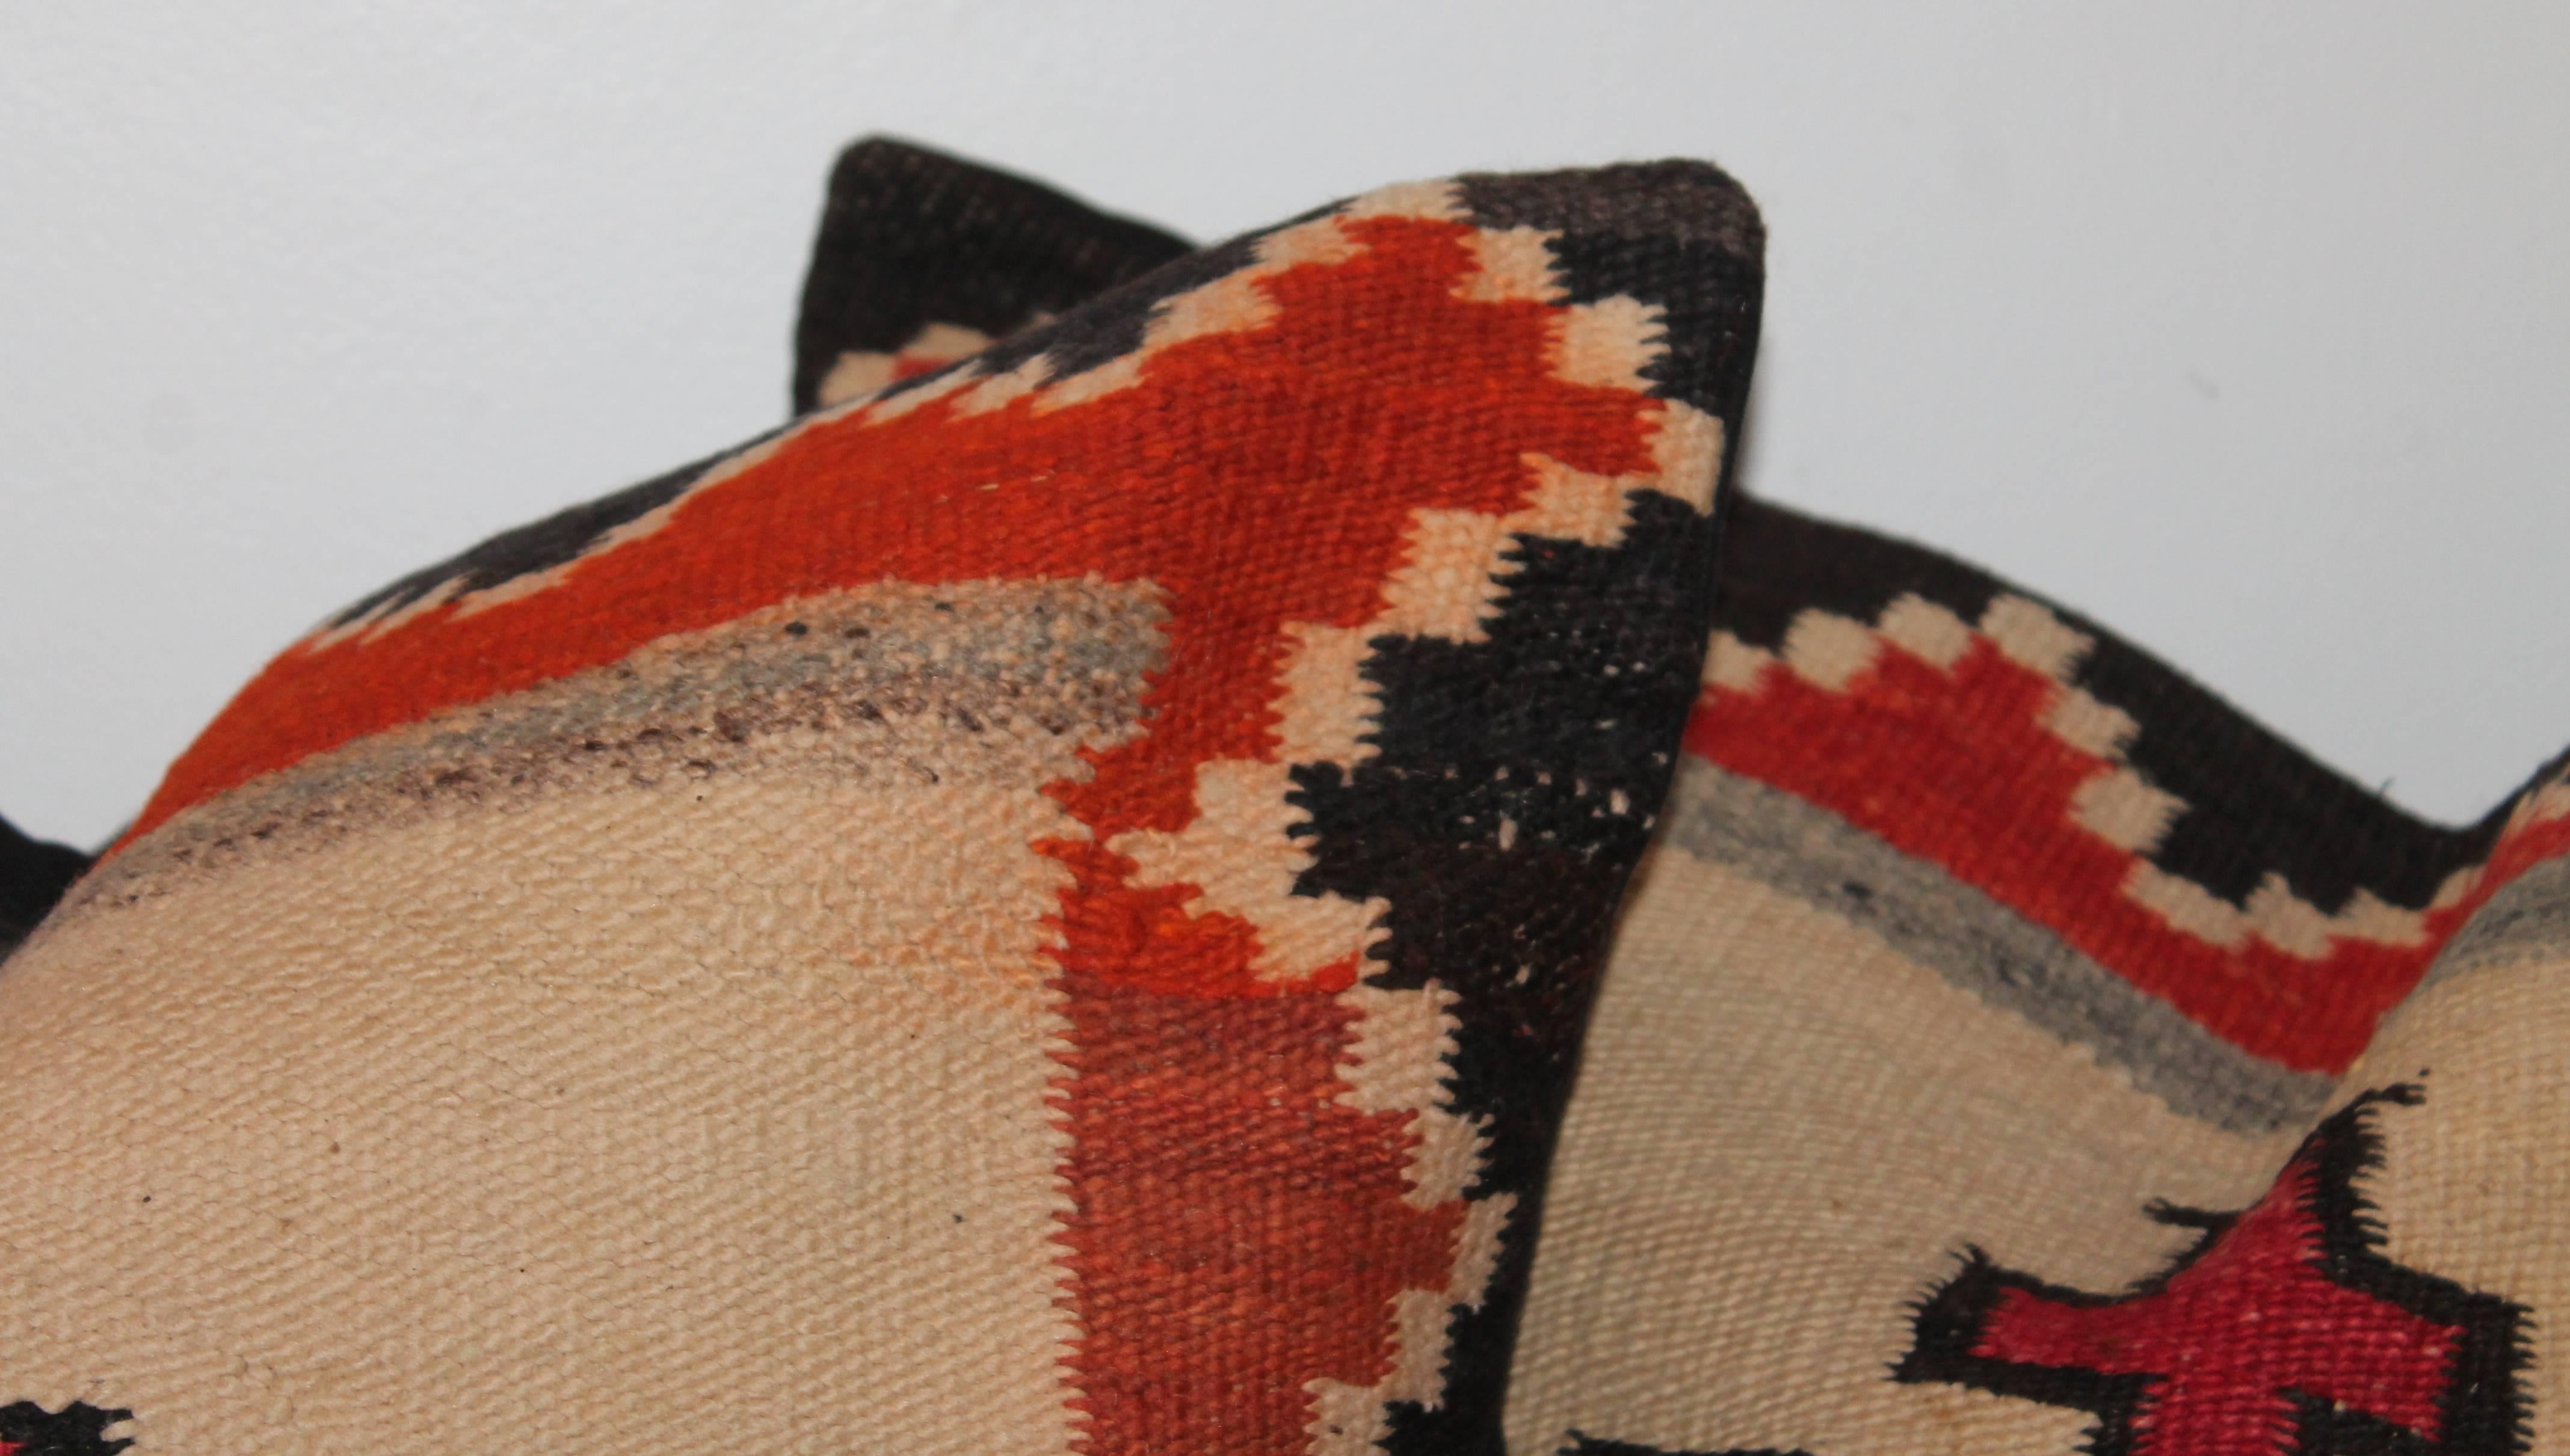 These large bolster pillows are from a early 19th transitional Navajo Indian weaving and have black cotton linen backing. The pillows are sold as a matched pair.